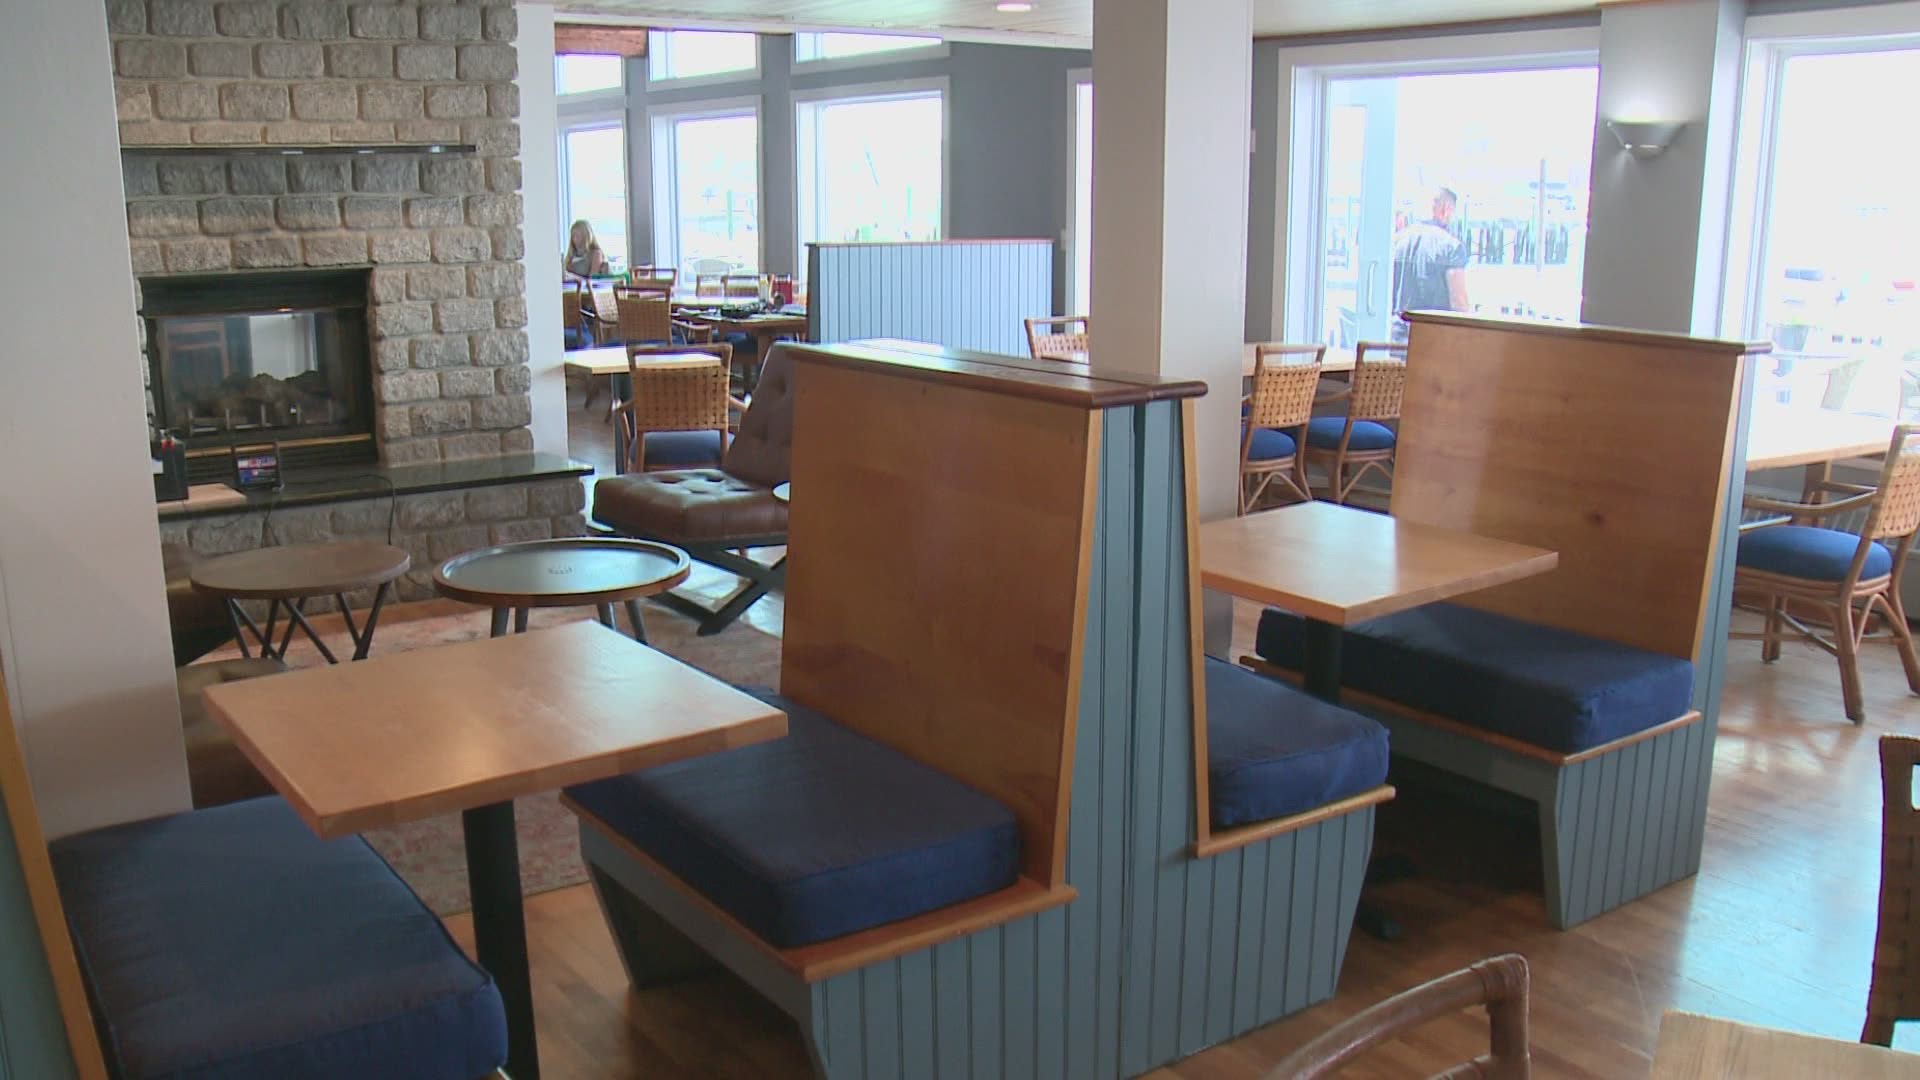 'This is heinous': Restaurant owners react to dine-in delay